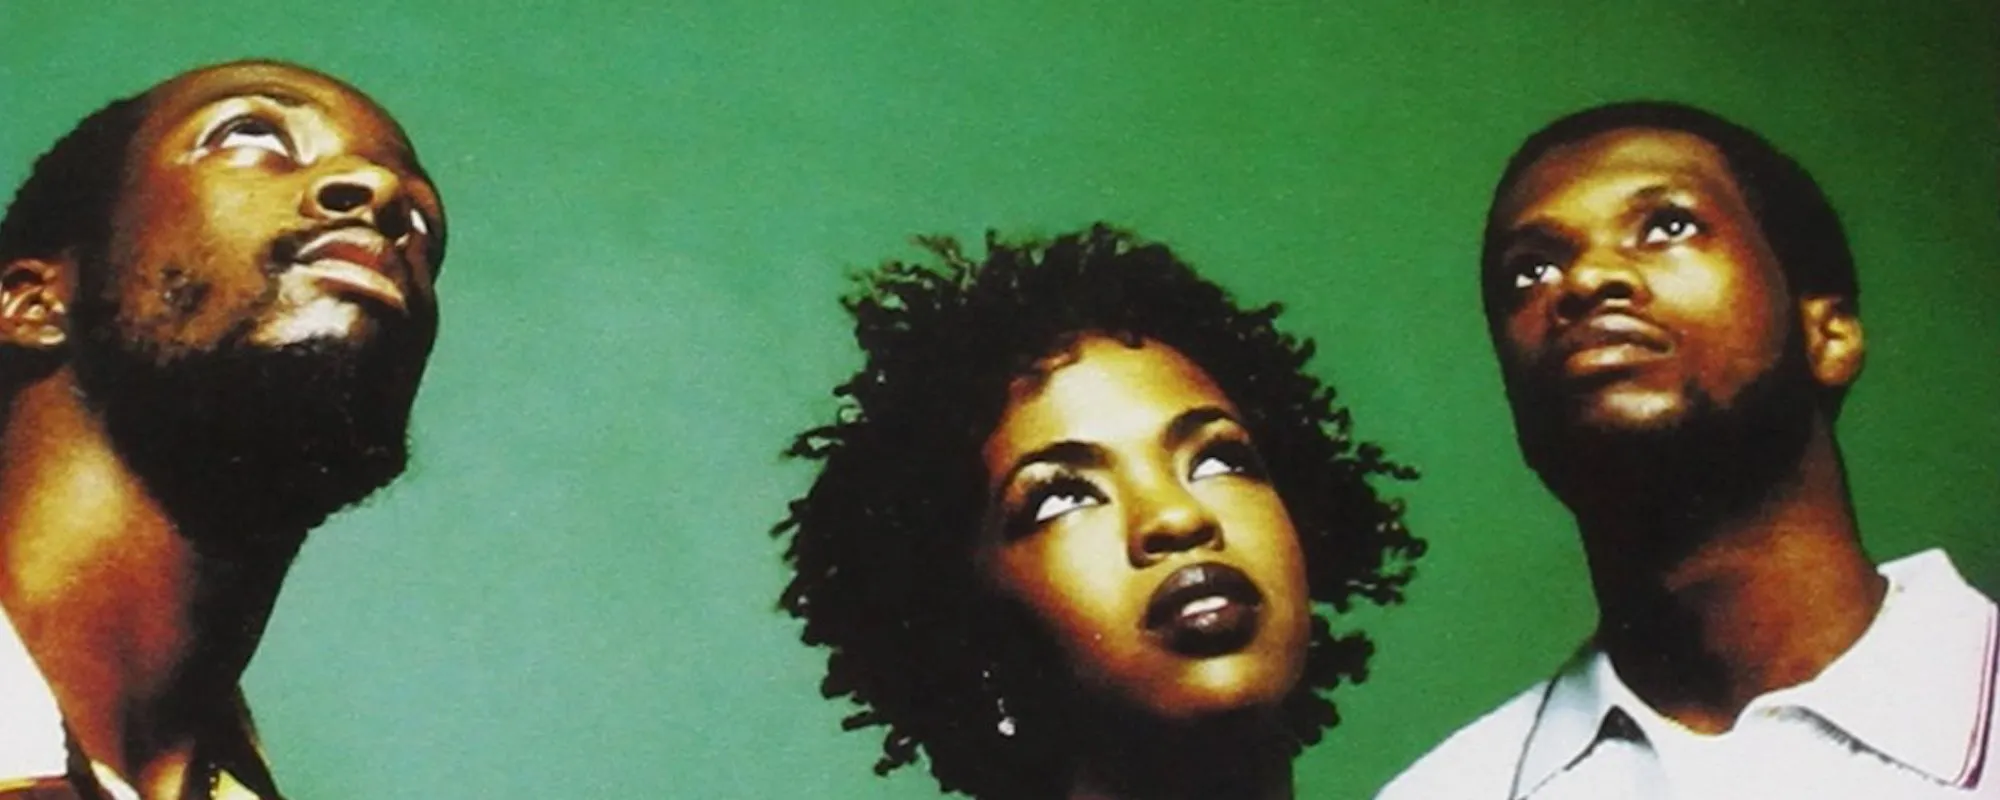 Lauryn Hill, Wyclef Jean Reunite to Perform Fugees Hits, Plan to Reschedule Reunion Tour